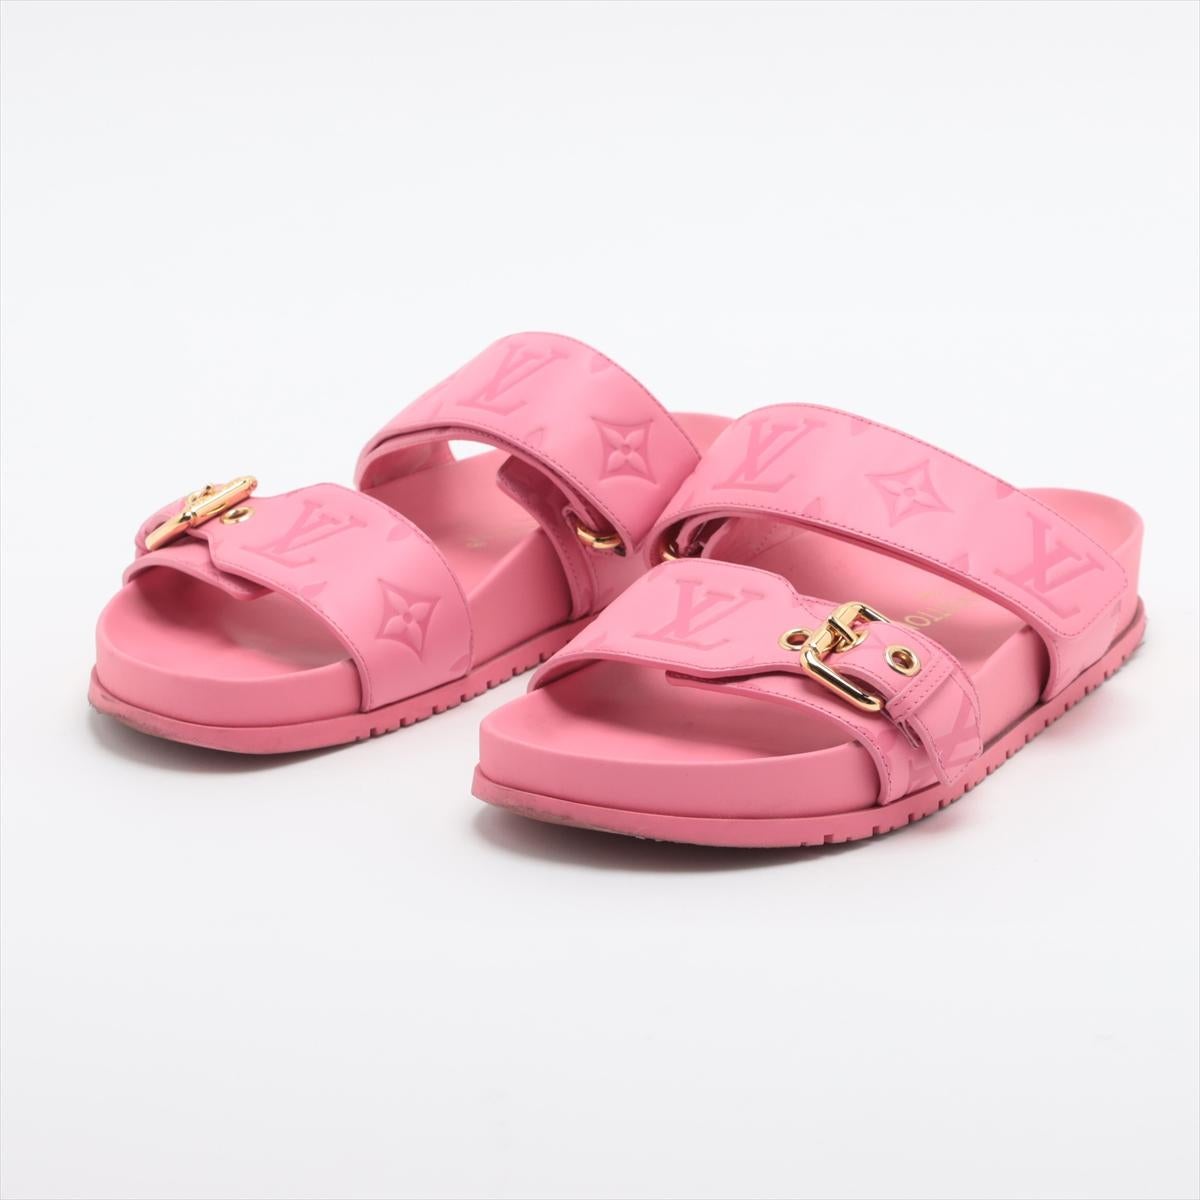 The Louis Vuitton Bom Dia Flat Comfort Mule in Pink is a stylish and comfortable footwear option that encapsulates the brand's commitment to luxury and contemporary design. The flat mules offer a perfect blend of fashion and comfort, making them